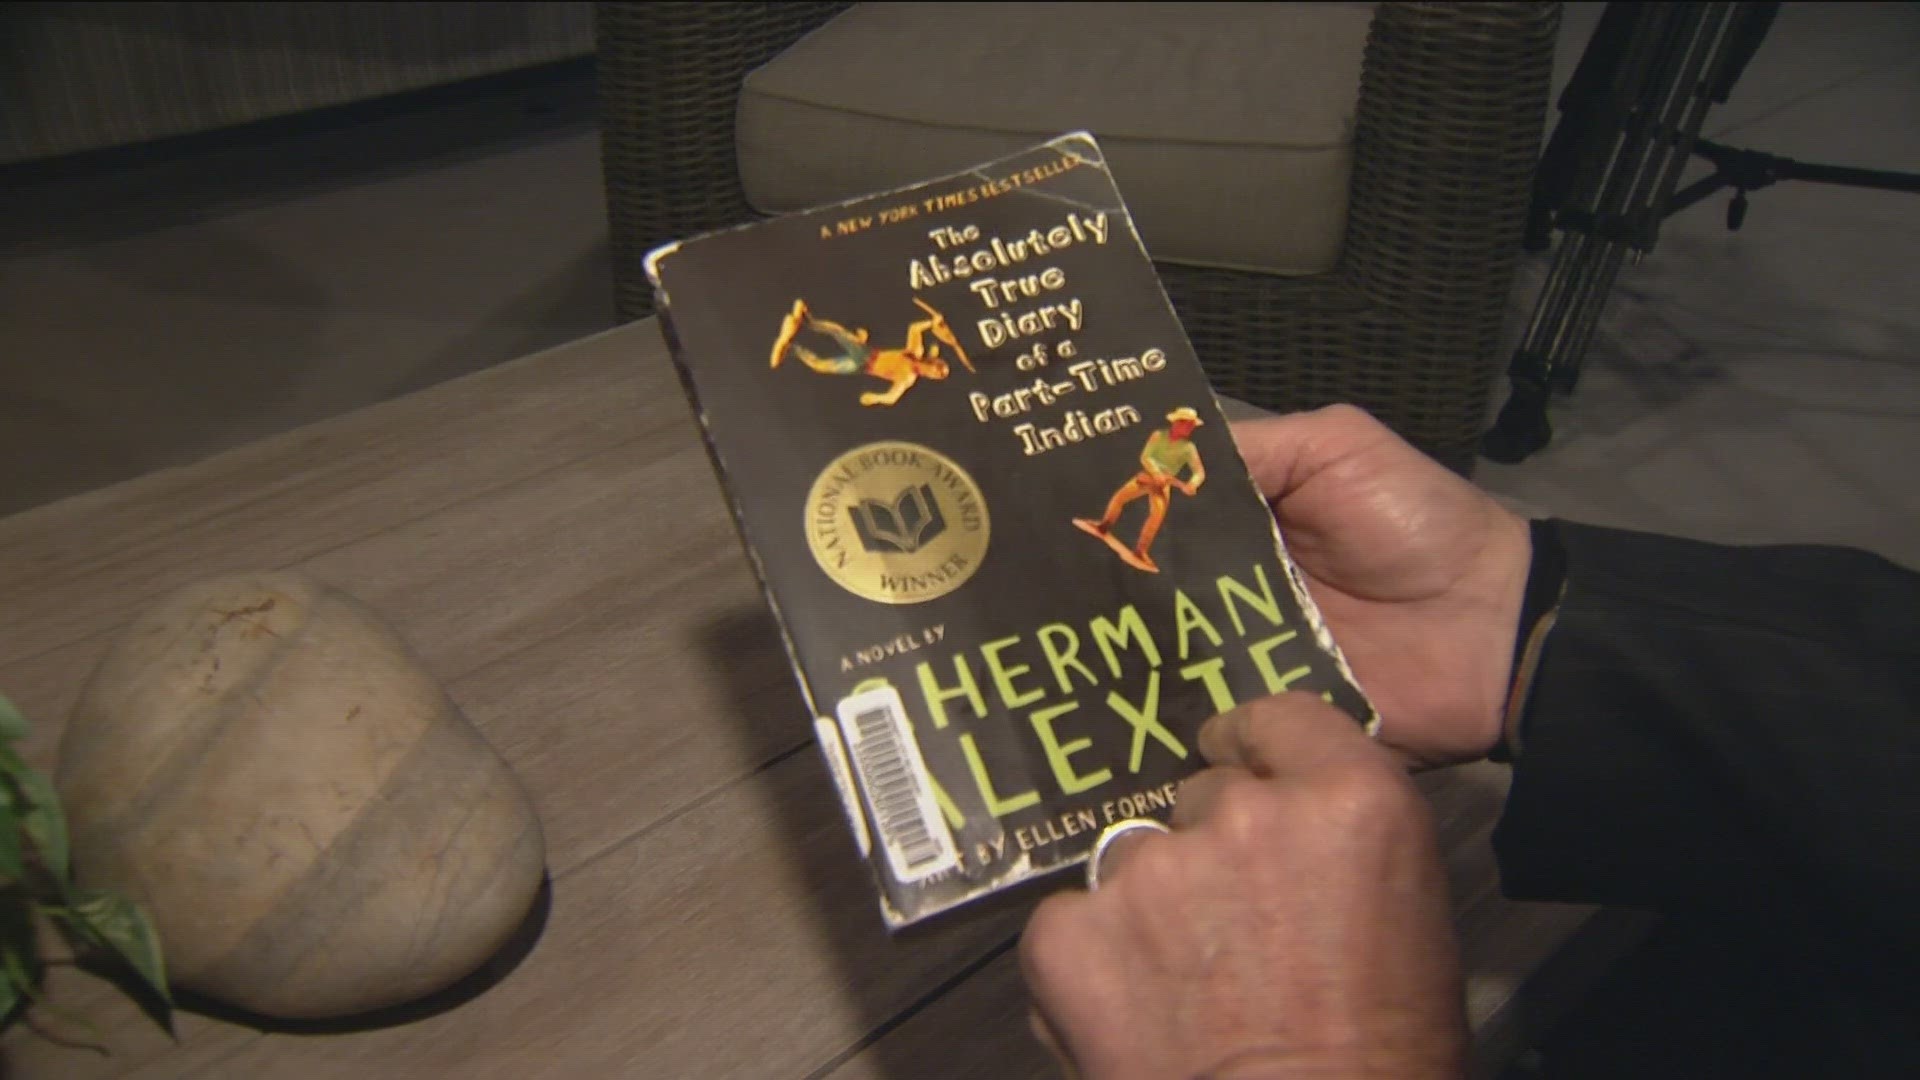 Frank Powell said he was shocked at the sexual content inside the book his daughter was assigned to read.